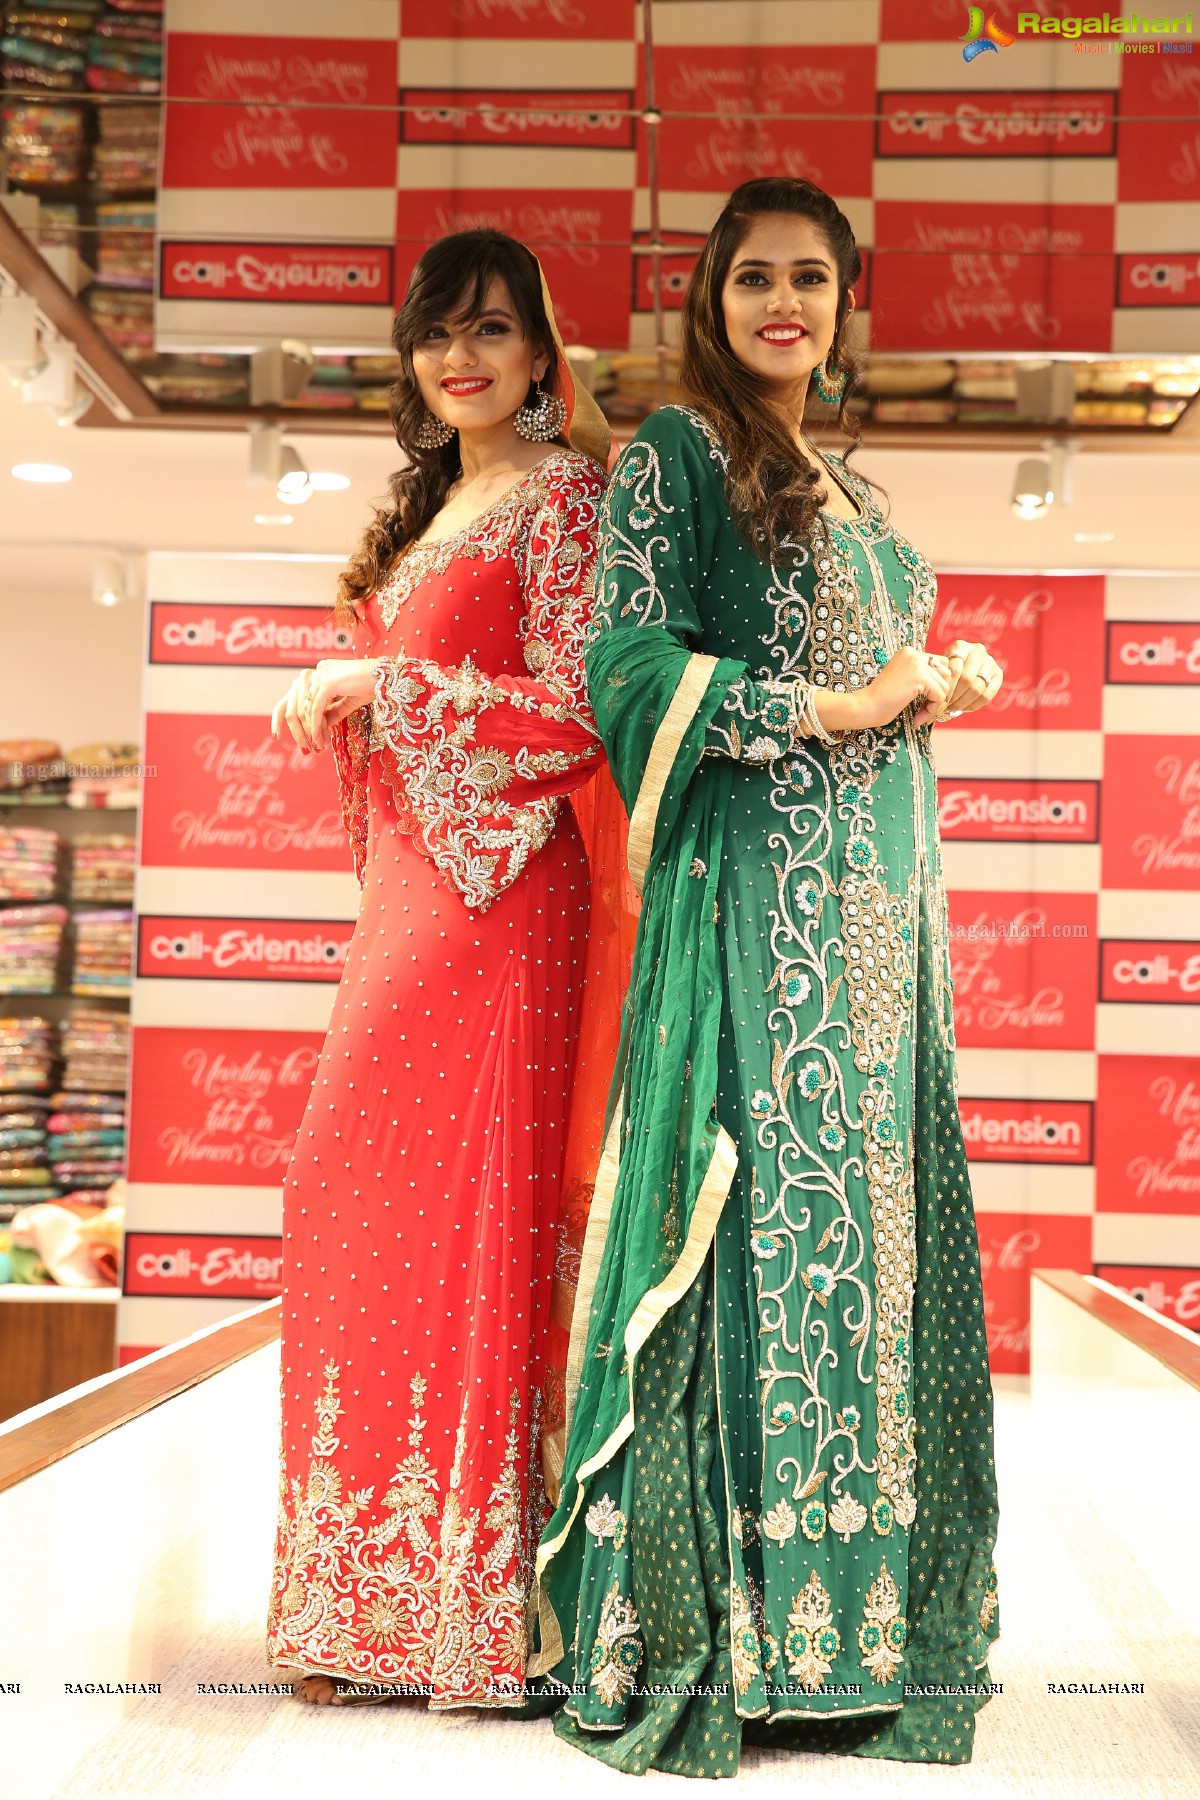 Cali-Shop Launches Its 2nd Store - Cali-Extension at Oasis Plaza, Tilak Road 